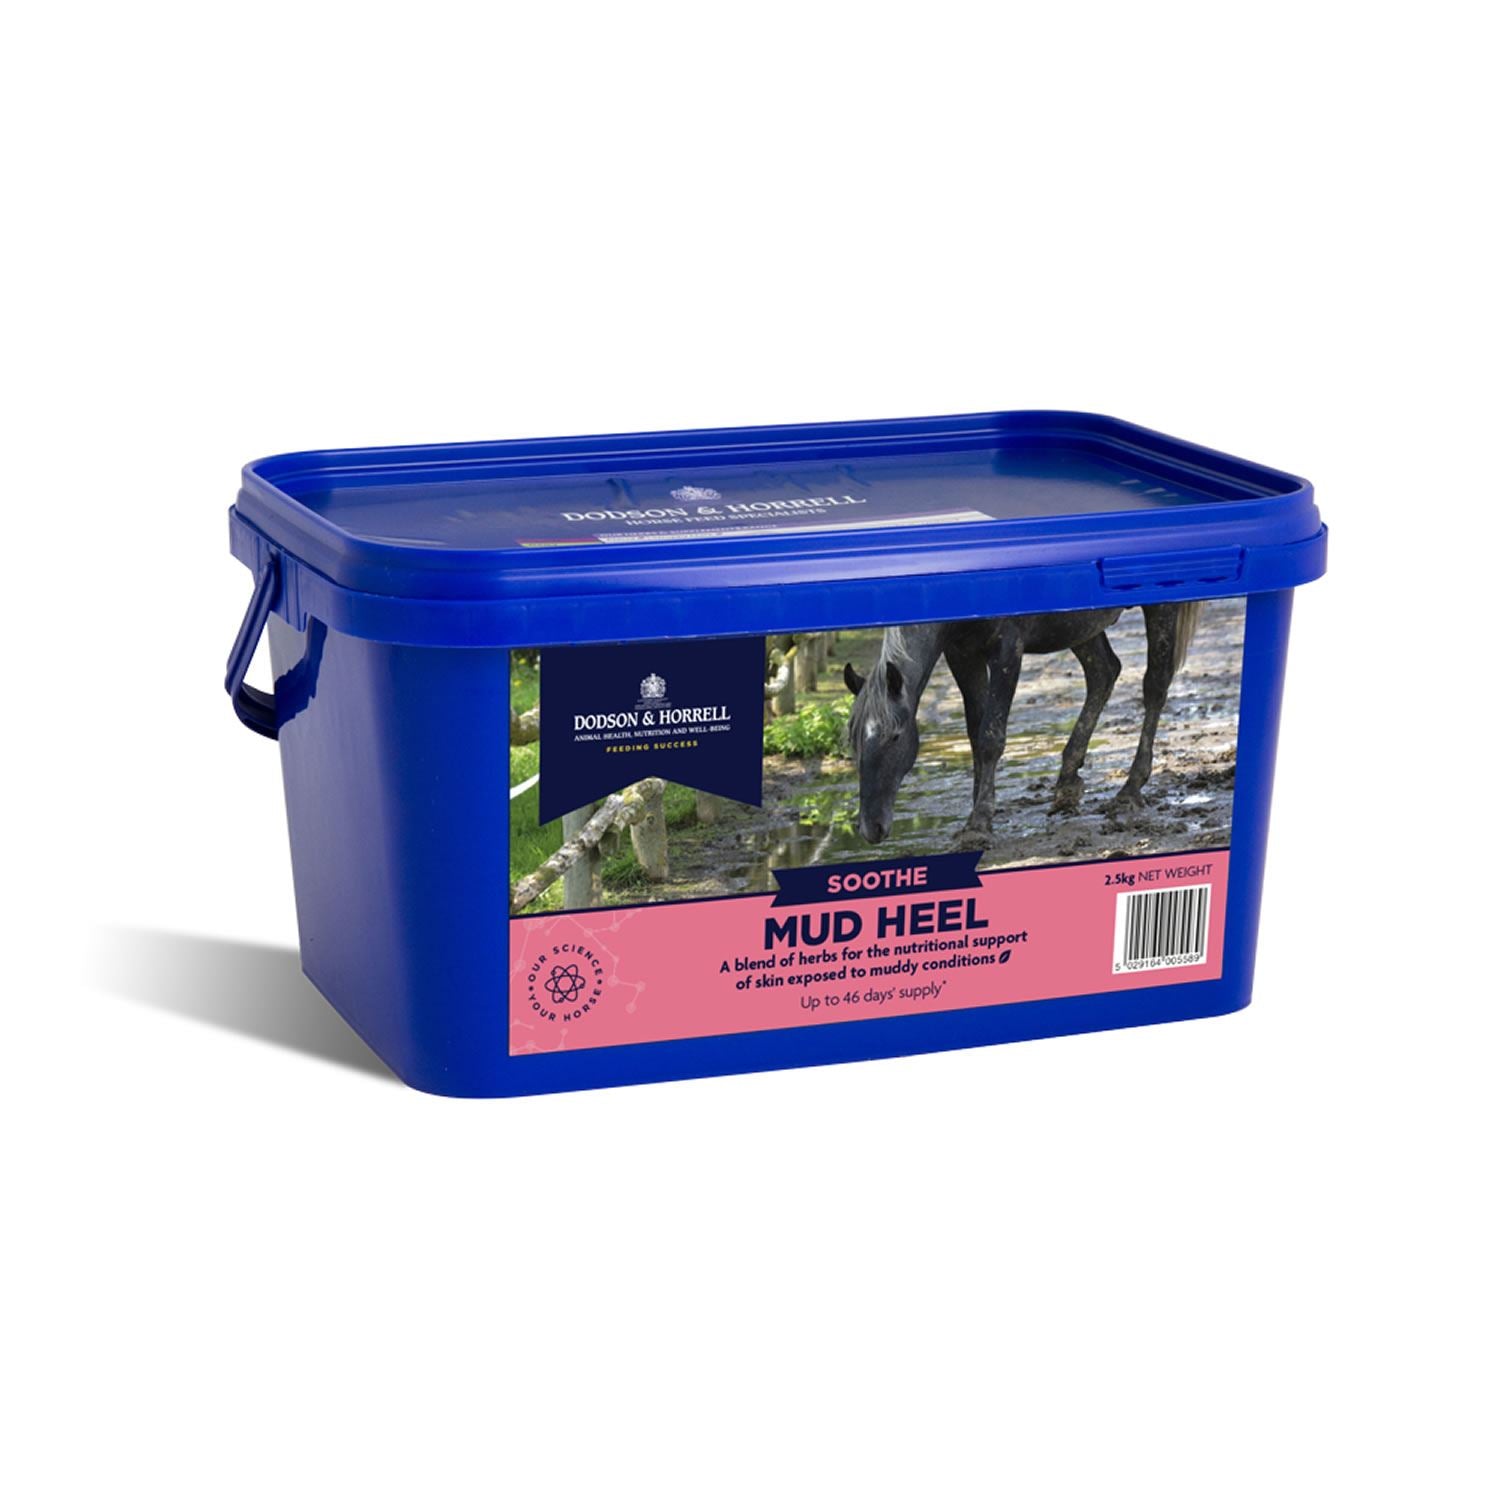 Dodson & Horrell Mud Heal – Just Horse Riders